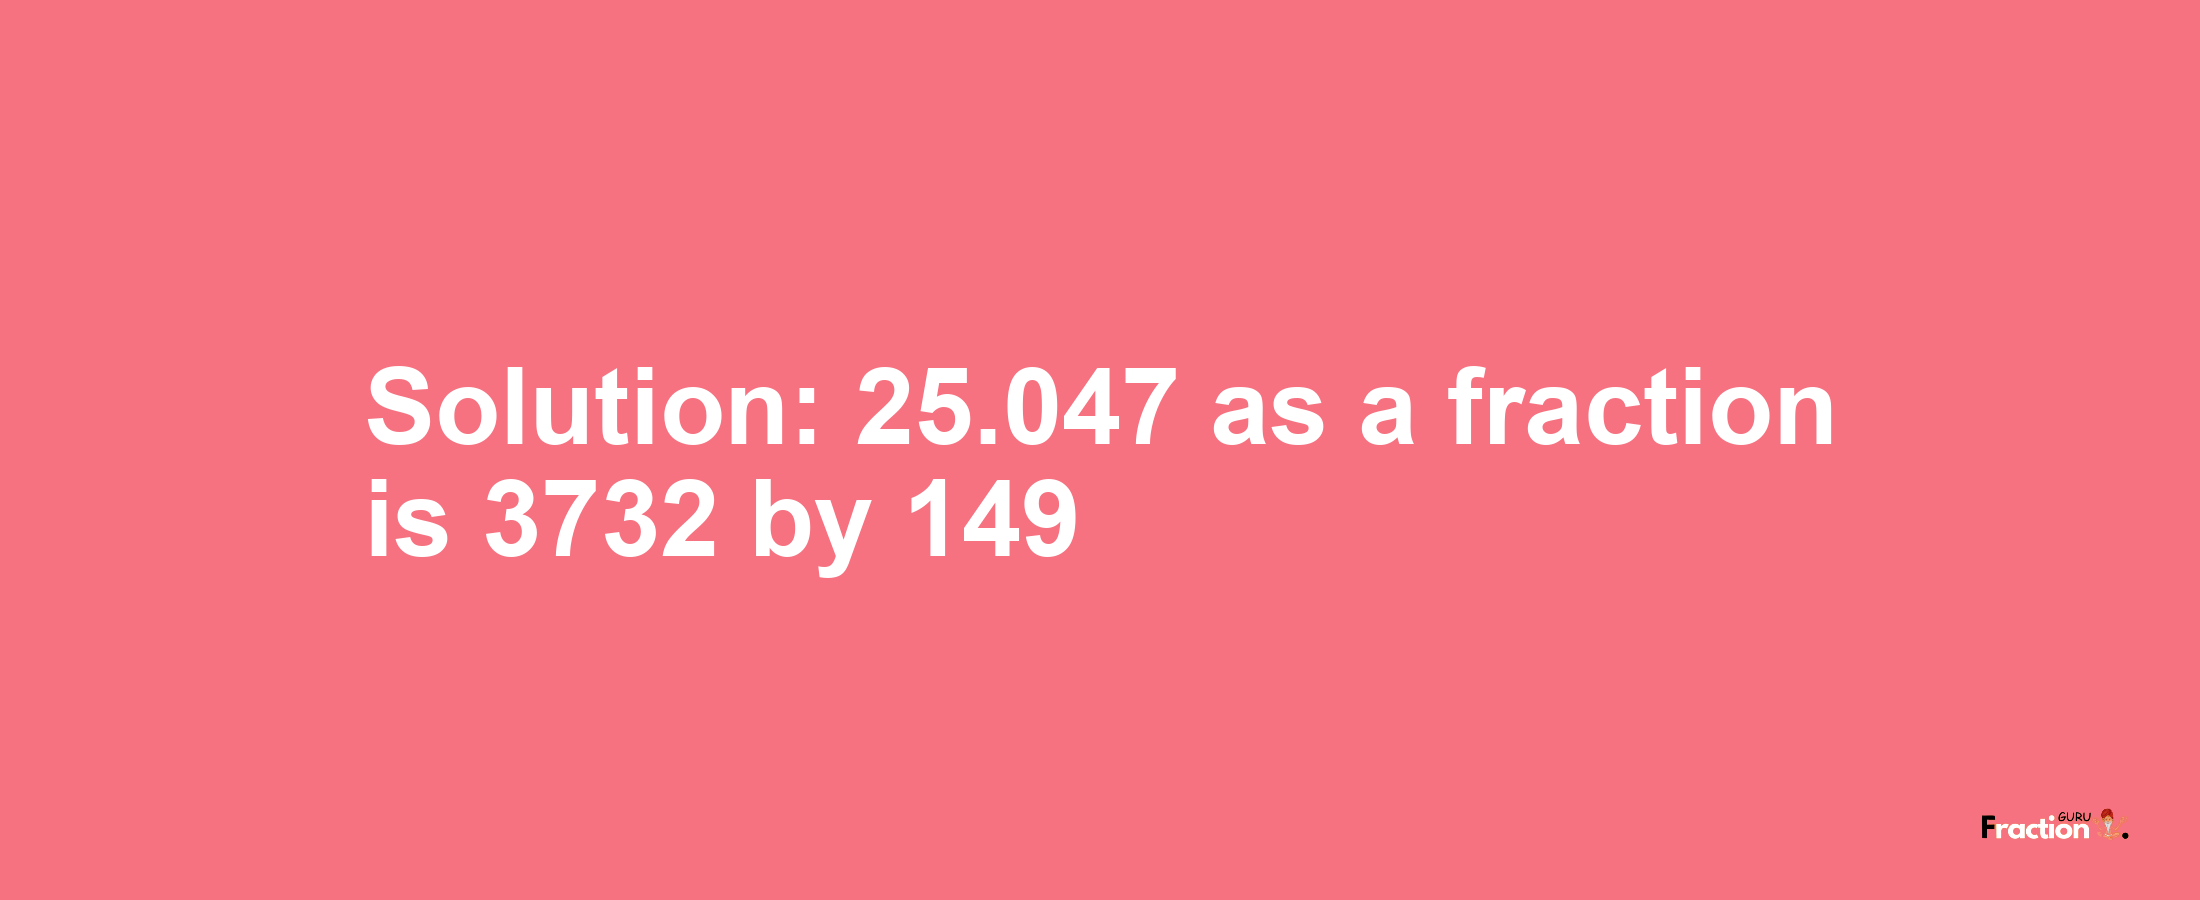 Solution:25.047 as a fraction is 3732/149